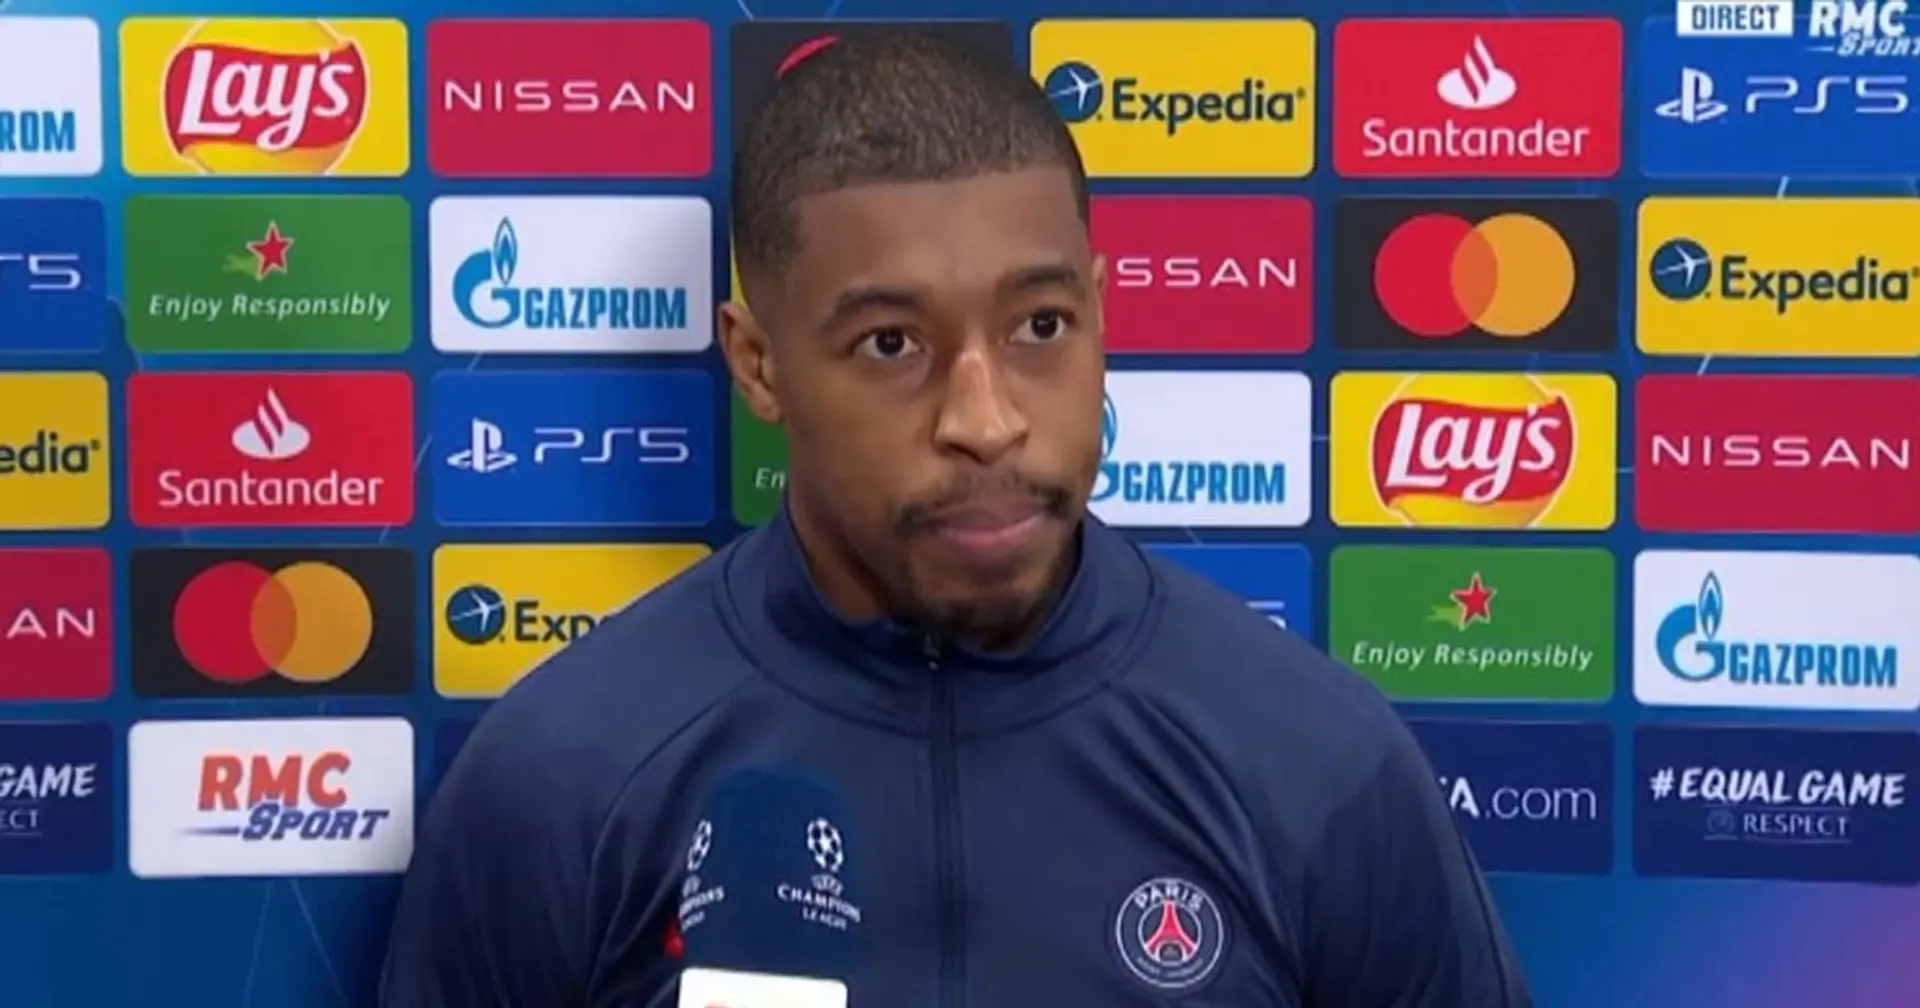 Kimpembe 'tempted' by Chelsea (reliability: 4 stars)